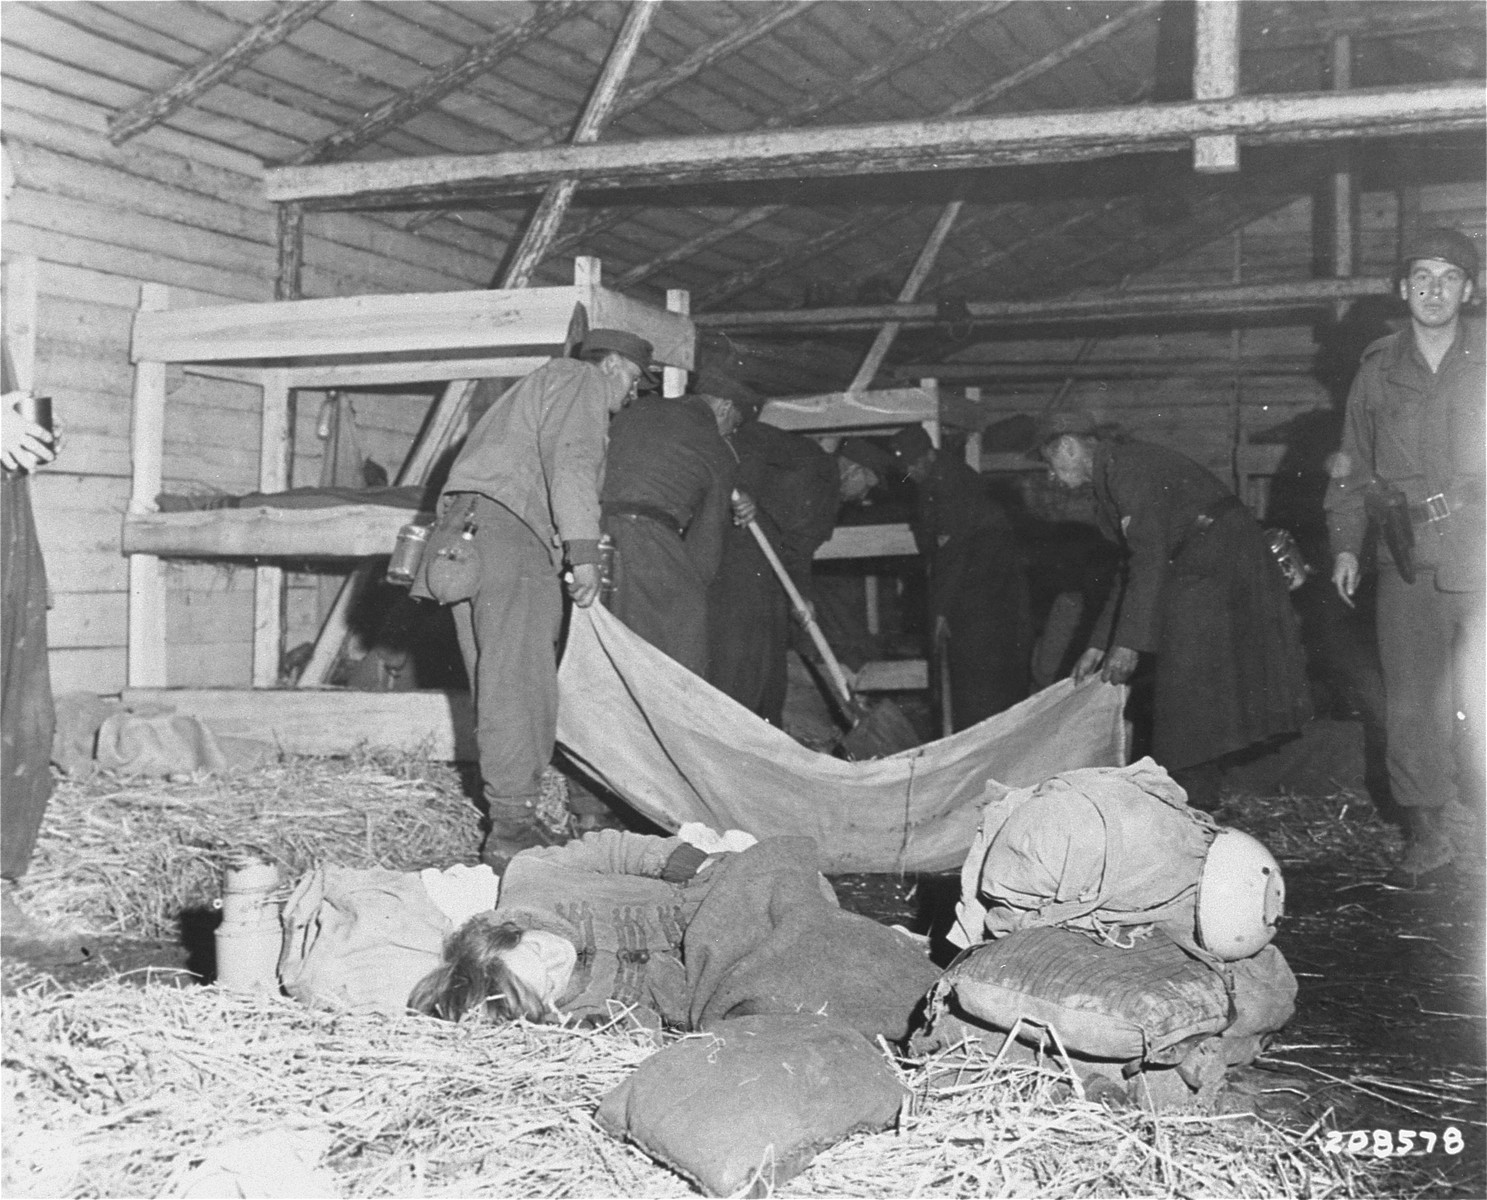 Medical corpsmen of the U.S. 71st Infantry Division, 3rd U.S. Army look on as captured German soldiers remove bodies from inside a barracks in Gunskirchen.  In the foreground, a Jewish girl lies huddled in the straw on the floor of the barracks.